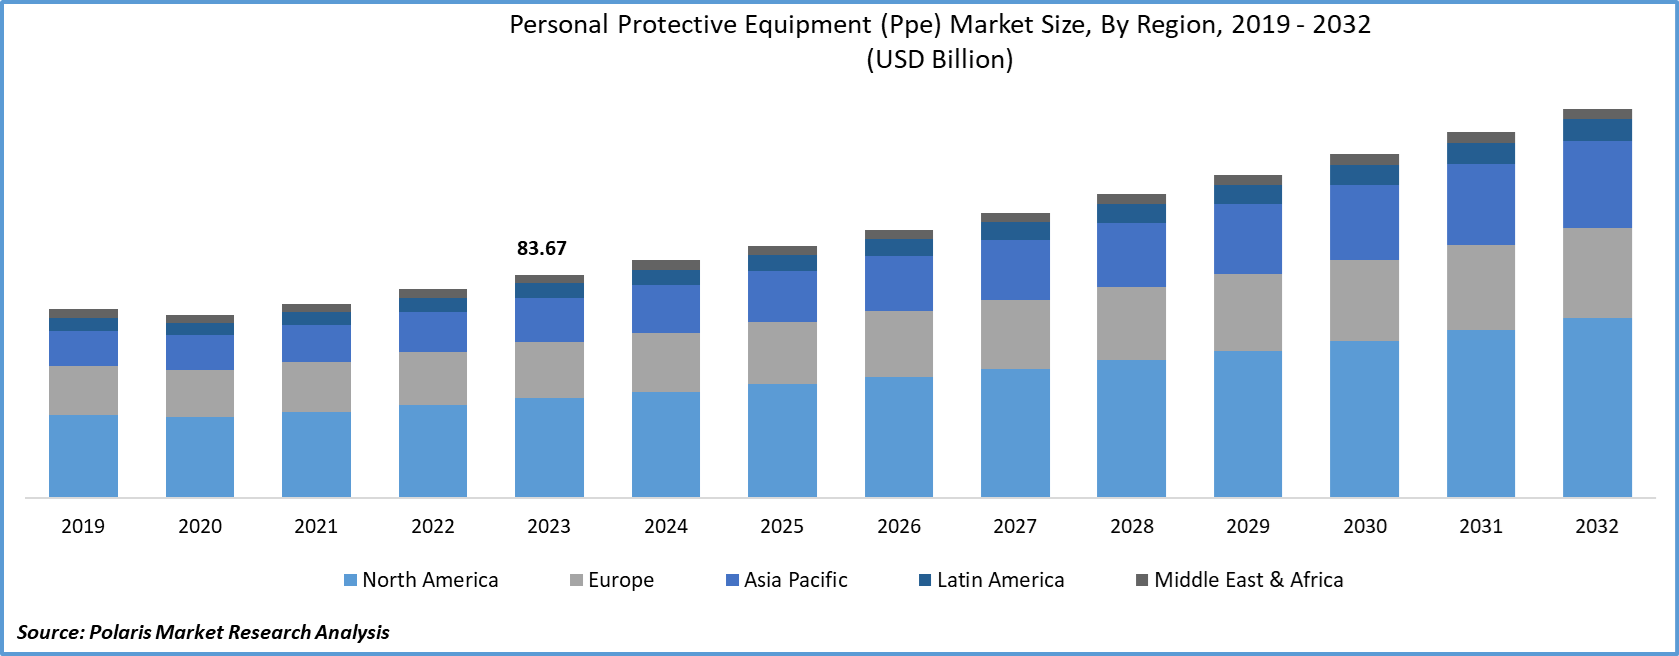 Personal Protective Equipment (PPE) Market Forecast till 2028